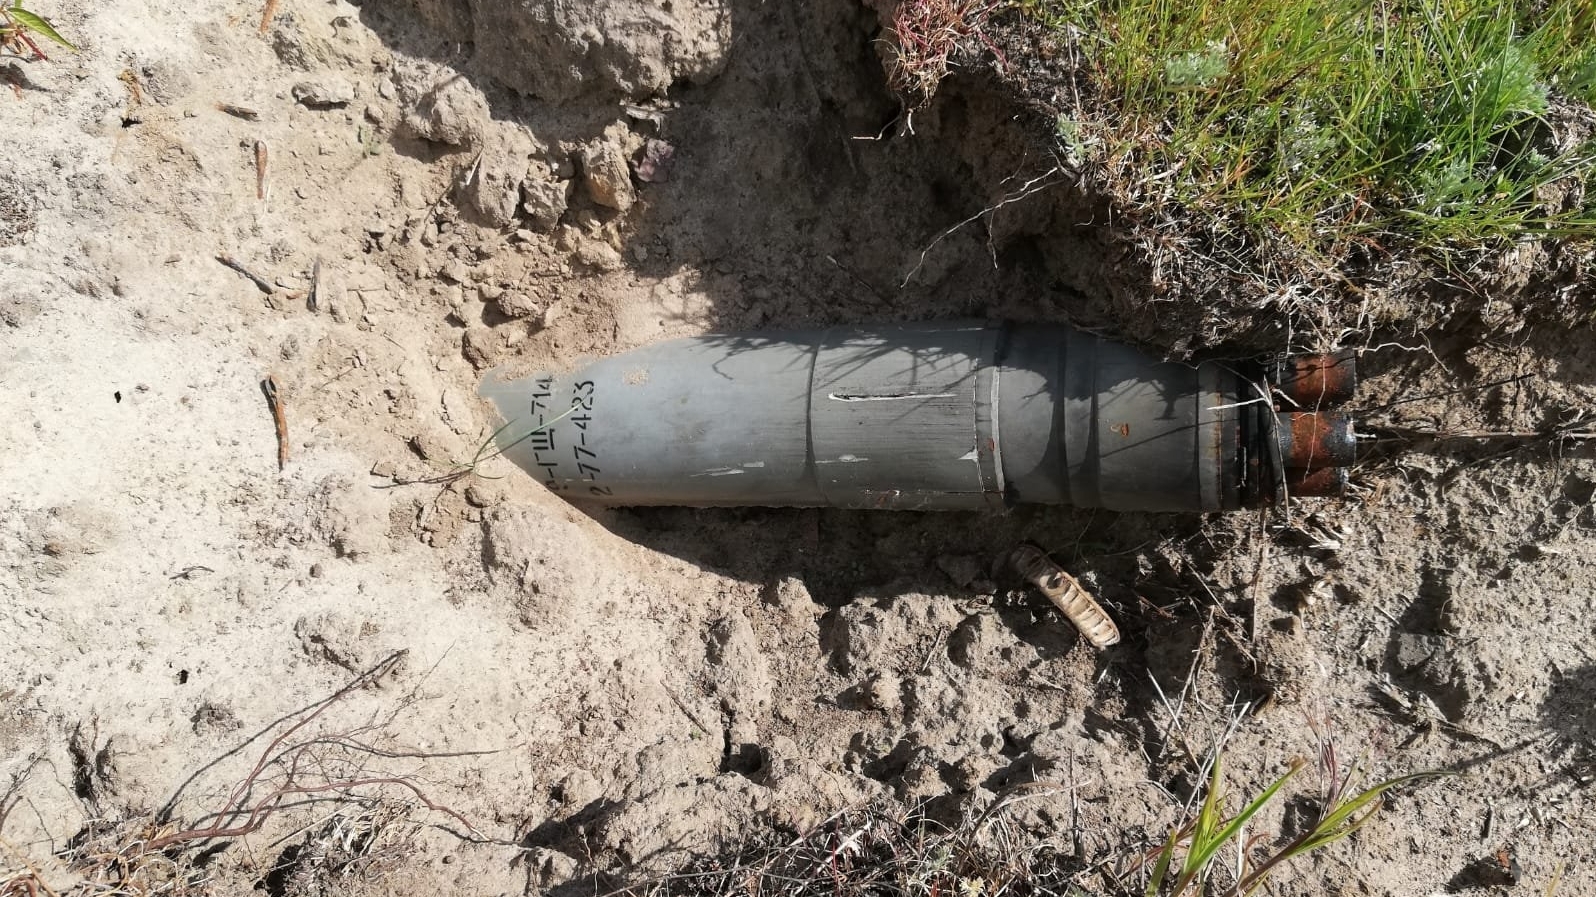 Nikopol police explosives officers found two unexploded shells